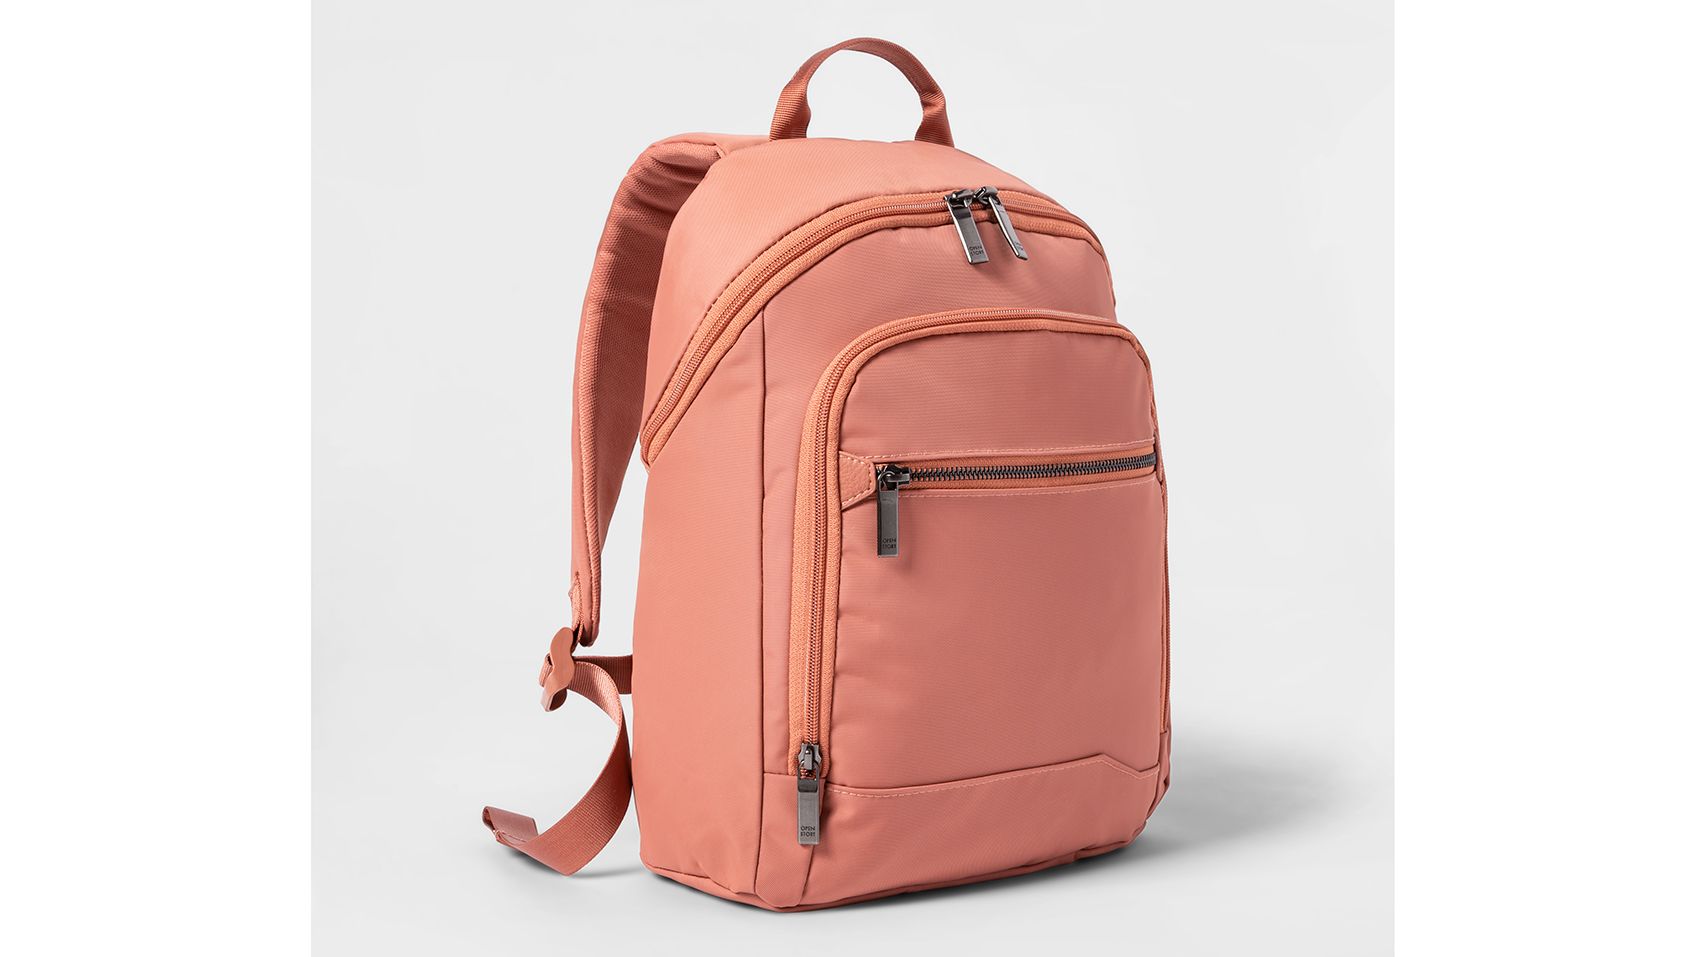 Fitted Flap Backpack - Open Story™ : Target